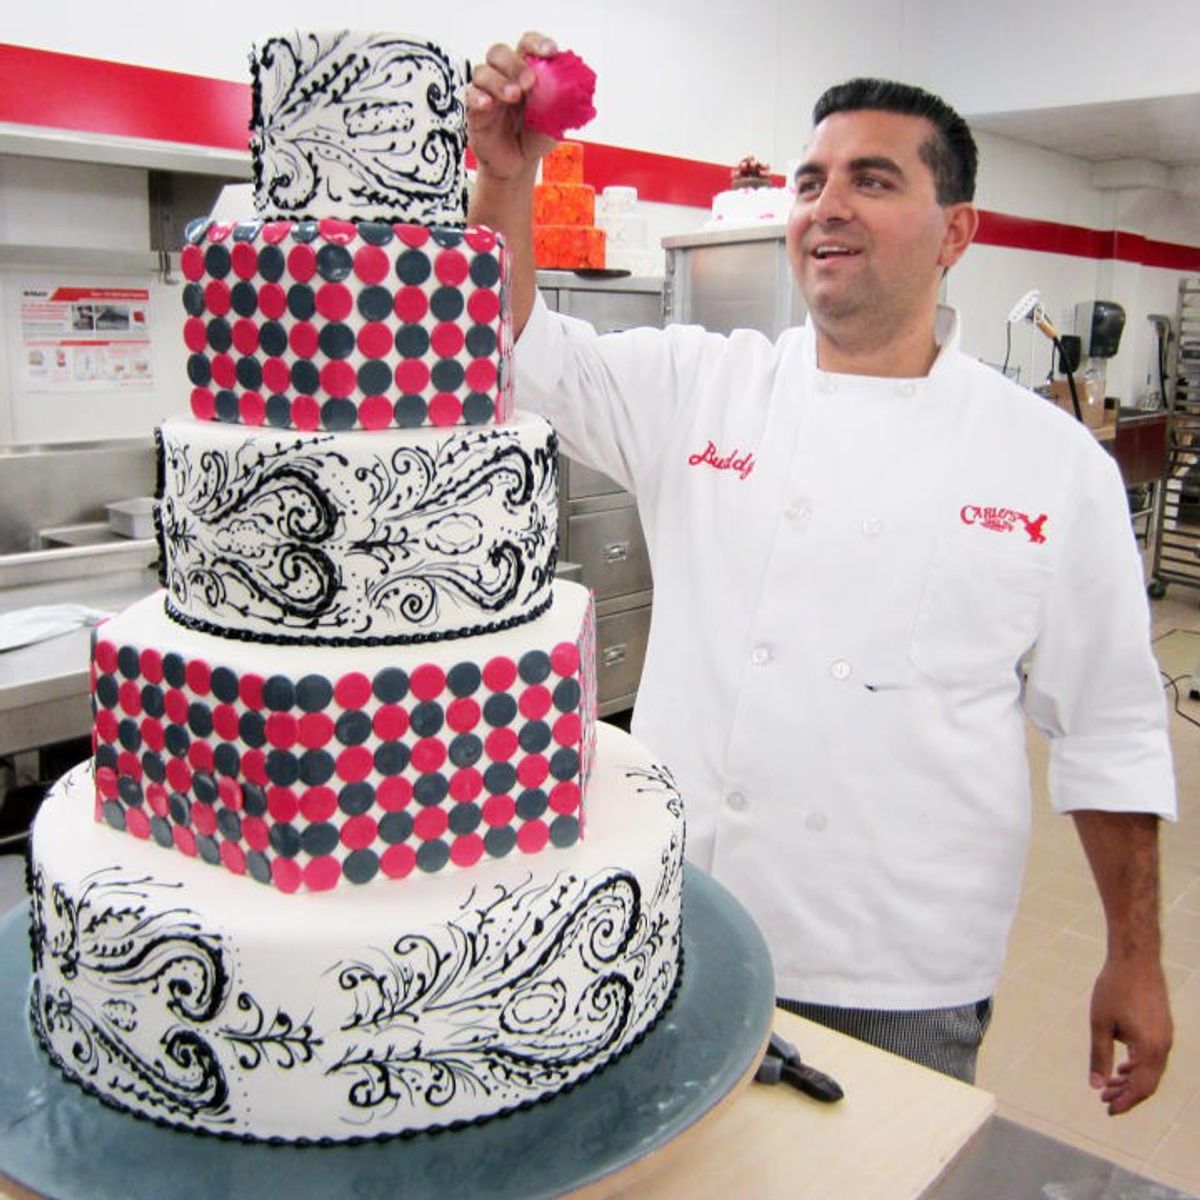 The "Cake Boss" Brings Carlo's Bakery To Dallas